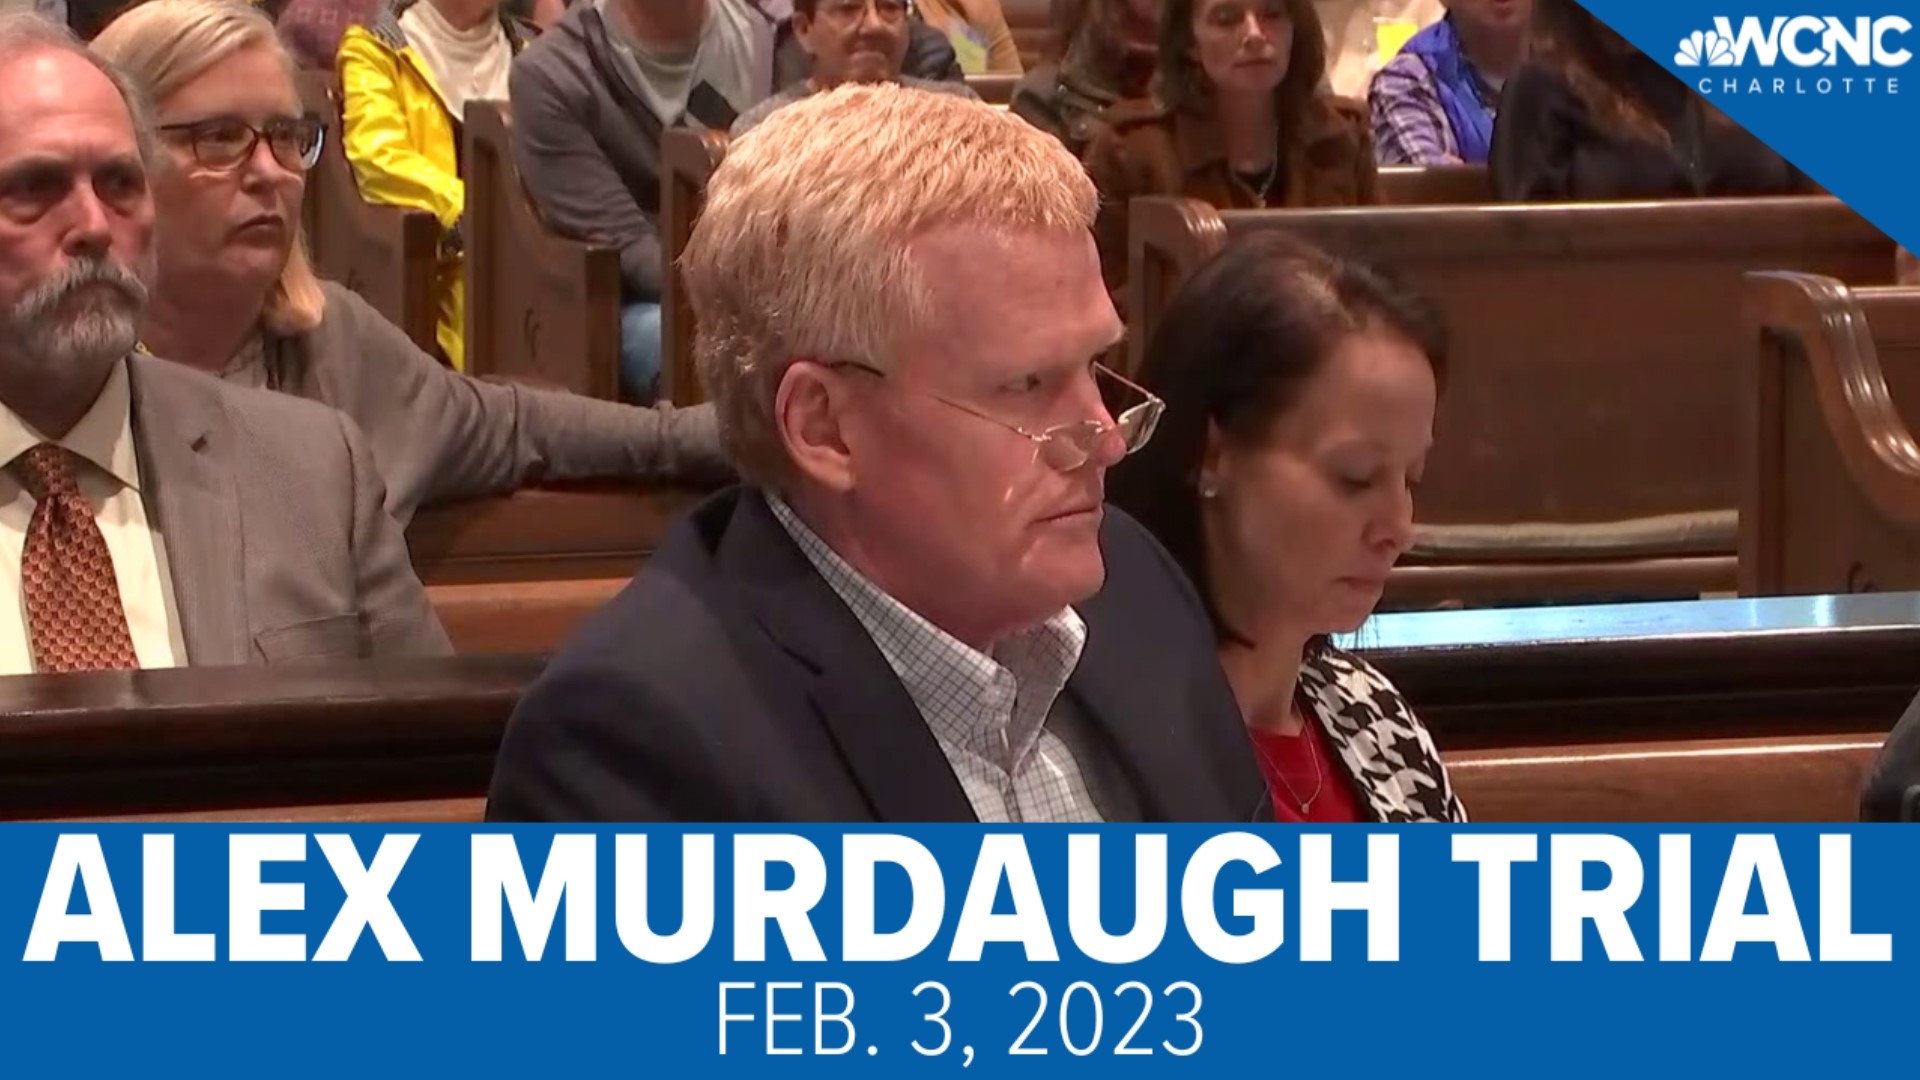 Murdaugh is accused of killing his wife, Maggie, and adult son, Paul, at the family's 1,700 acre estate in 2021.